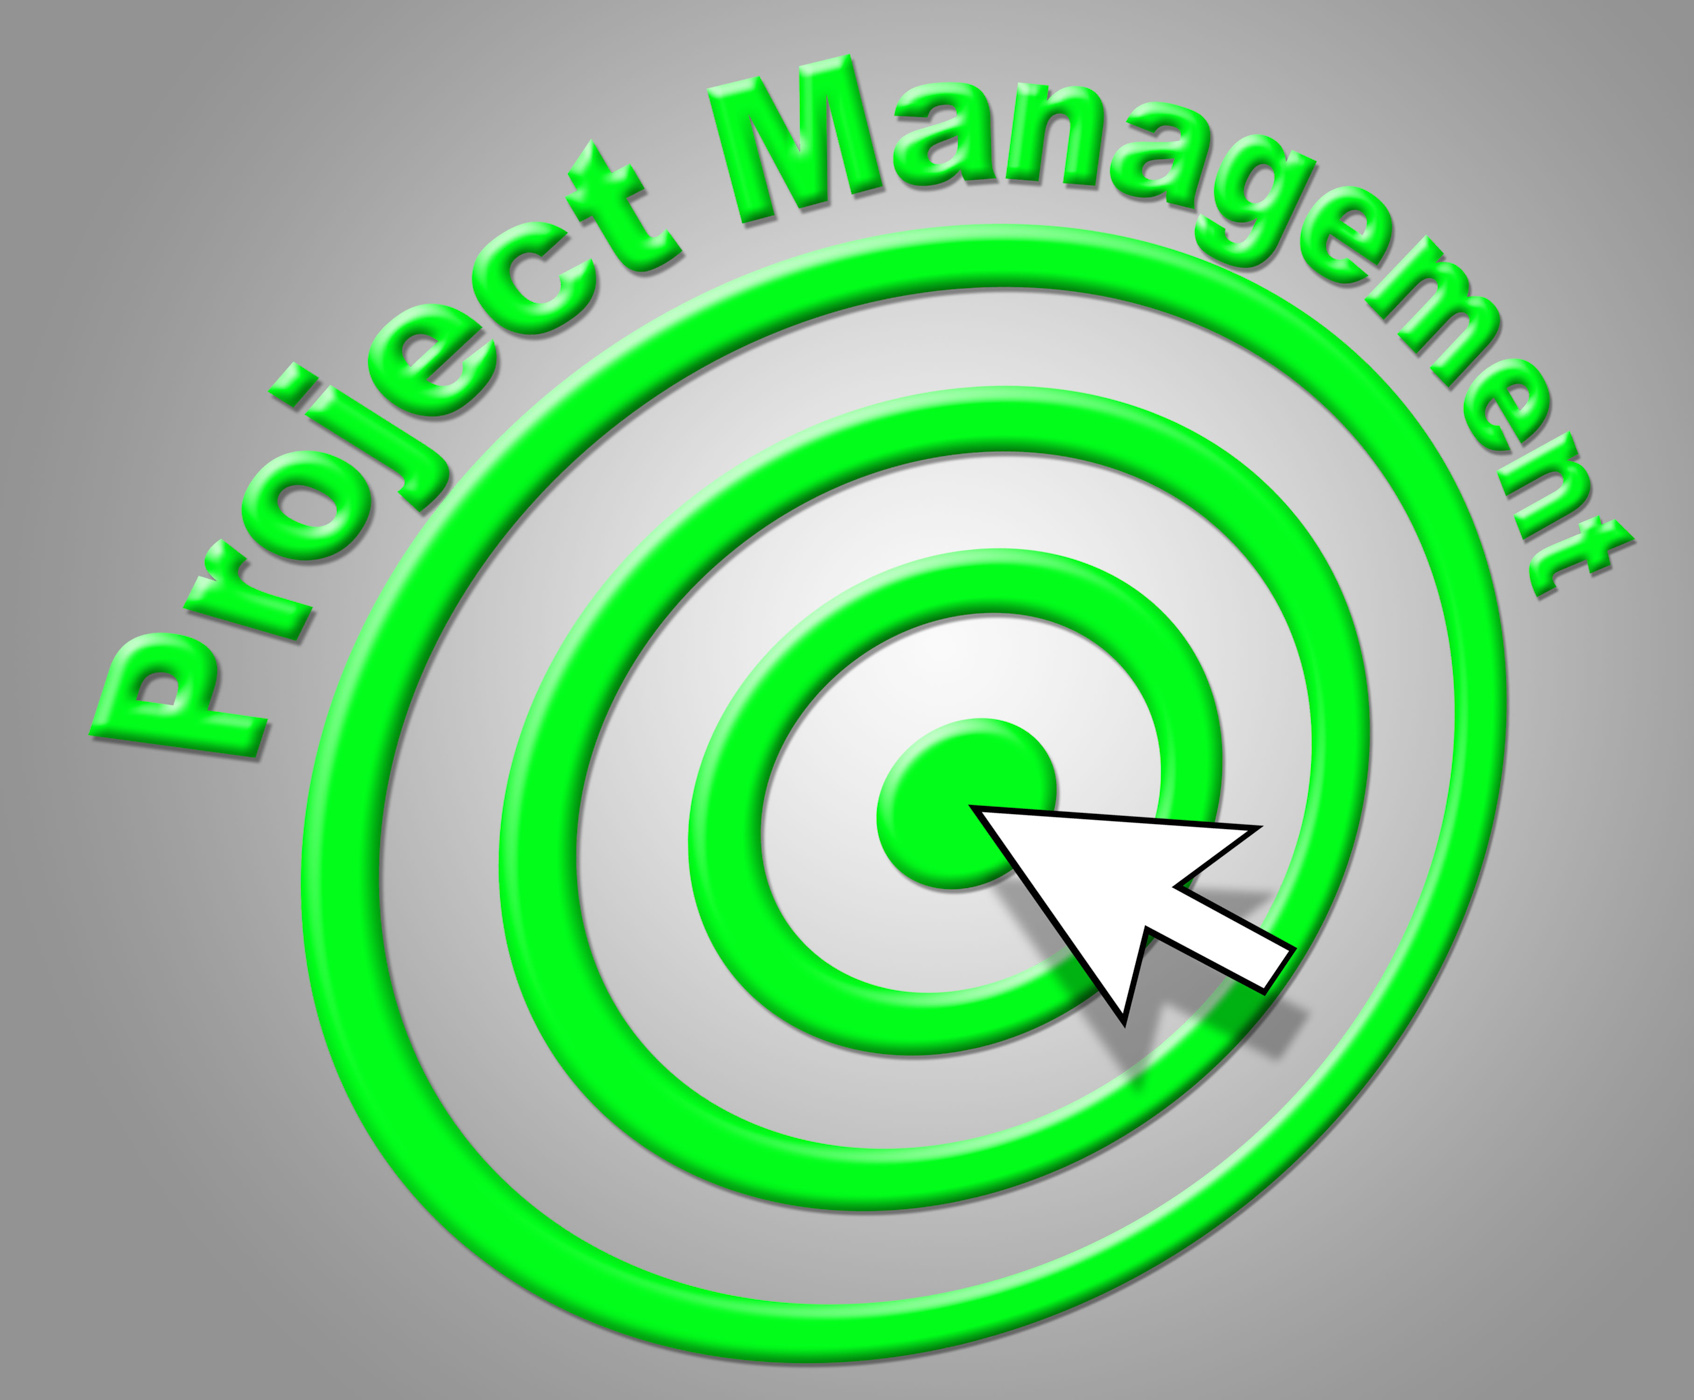 Project management shows enterprise projects and administration photo